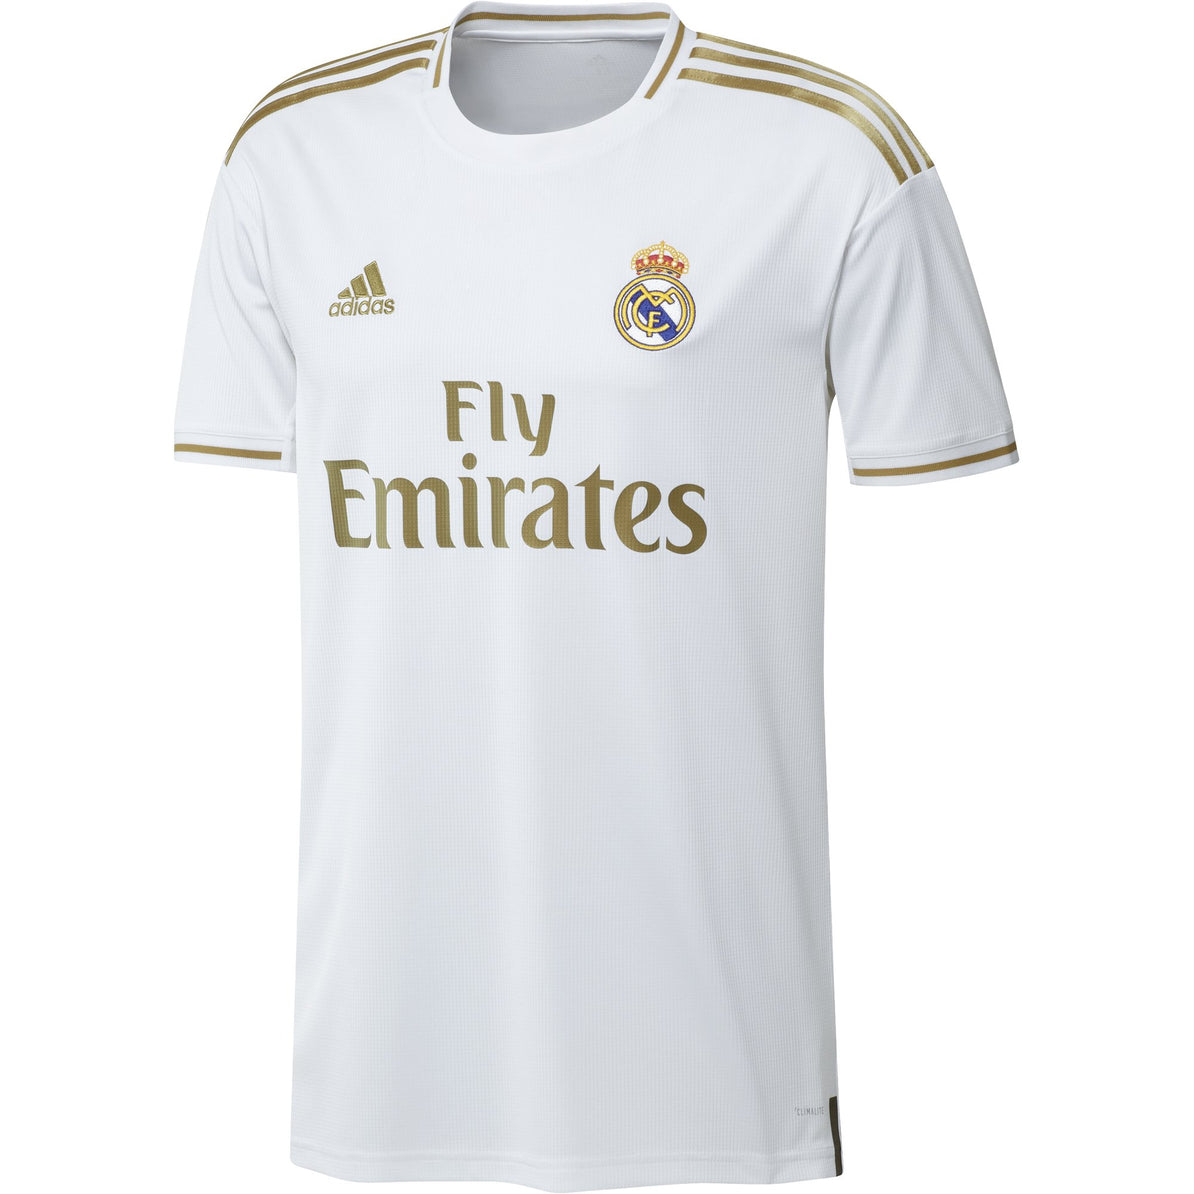 real madrid fly emirates jersey